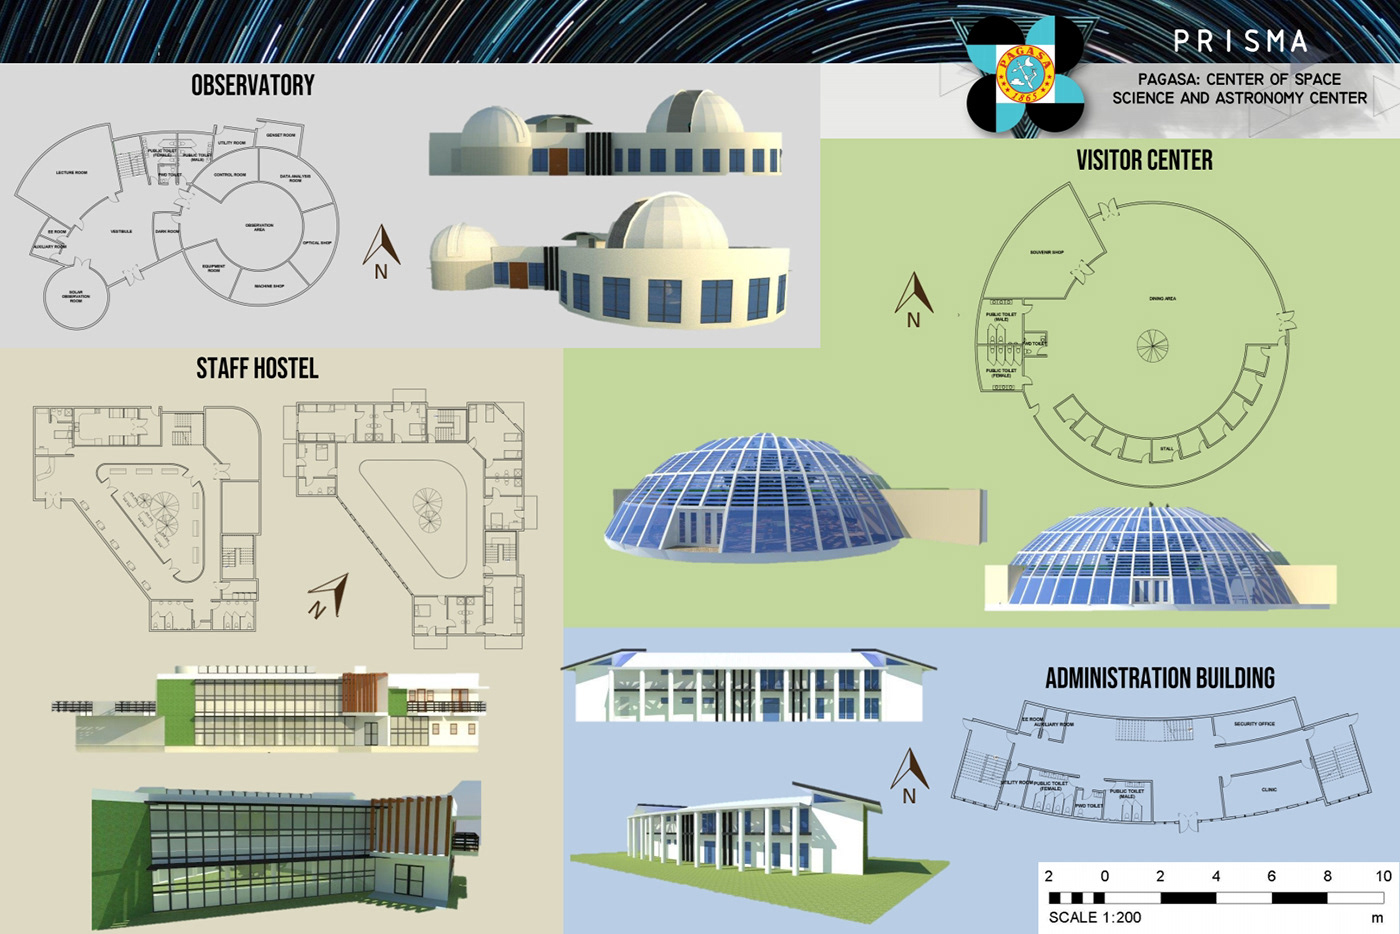 architecture thesis feu pagasa space science astronomy tanay Rizal philippines